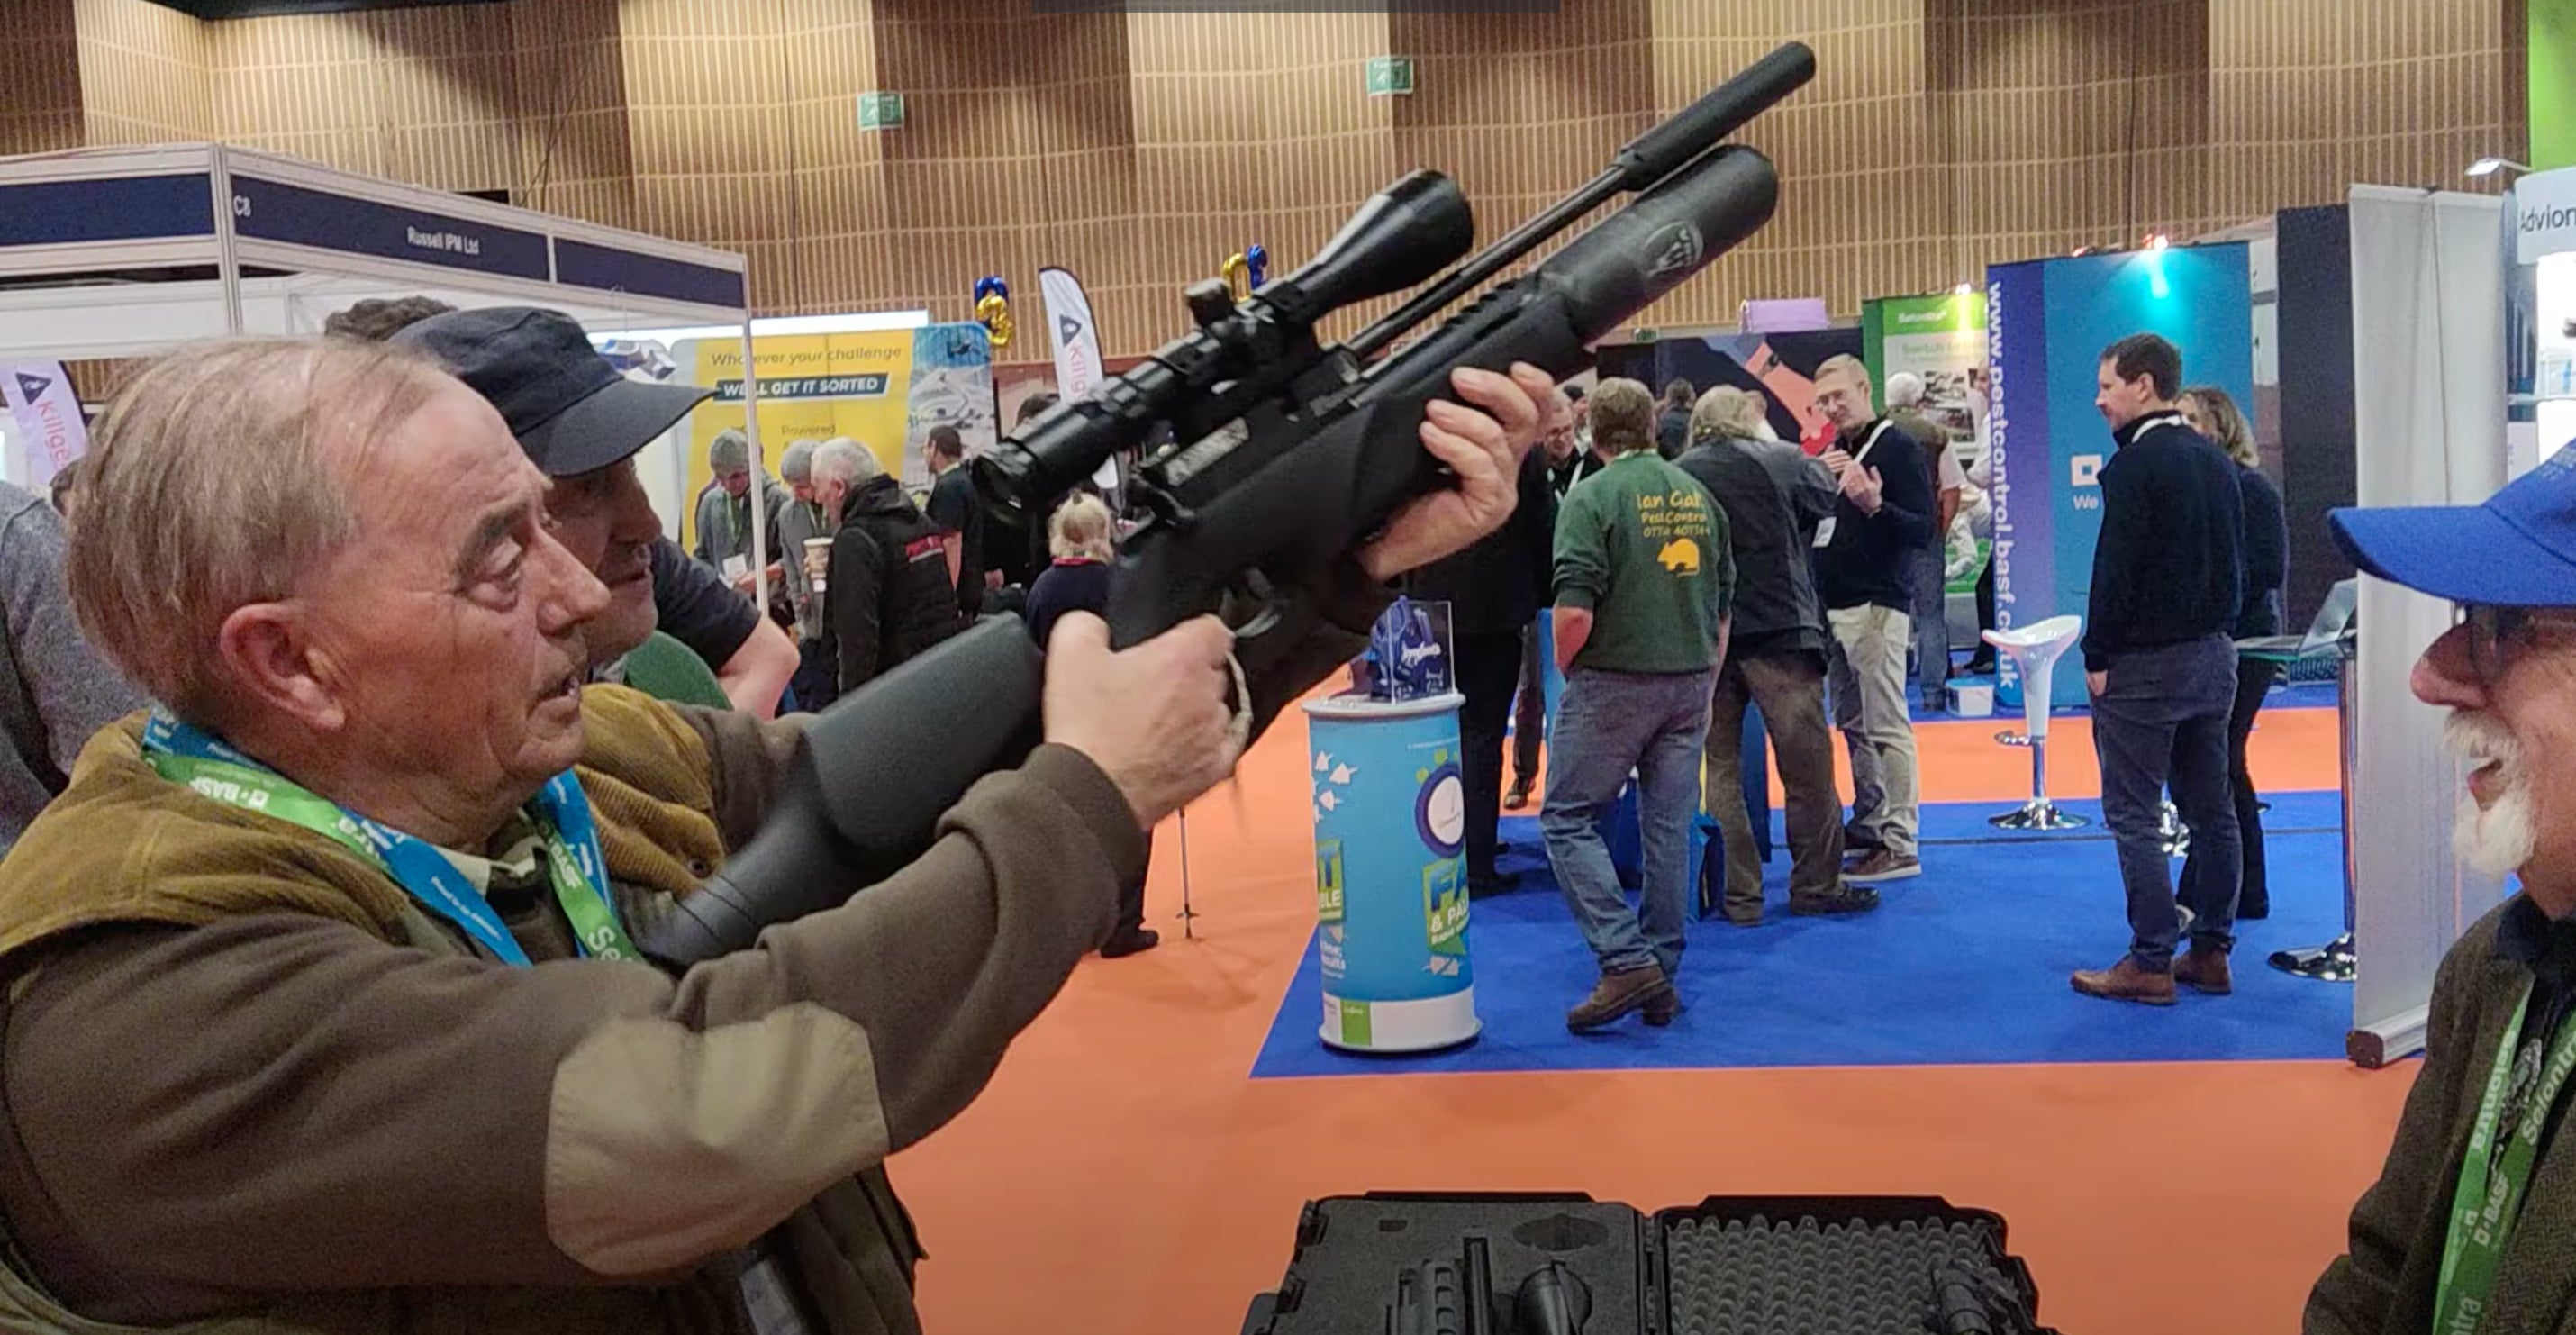 David Mills allows his prototype air rifle to be tested by a potential buyer hoping to tackle other types of pests